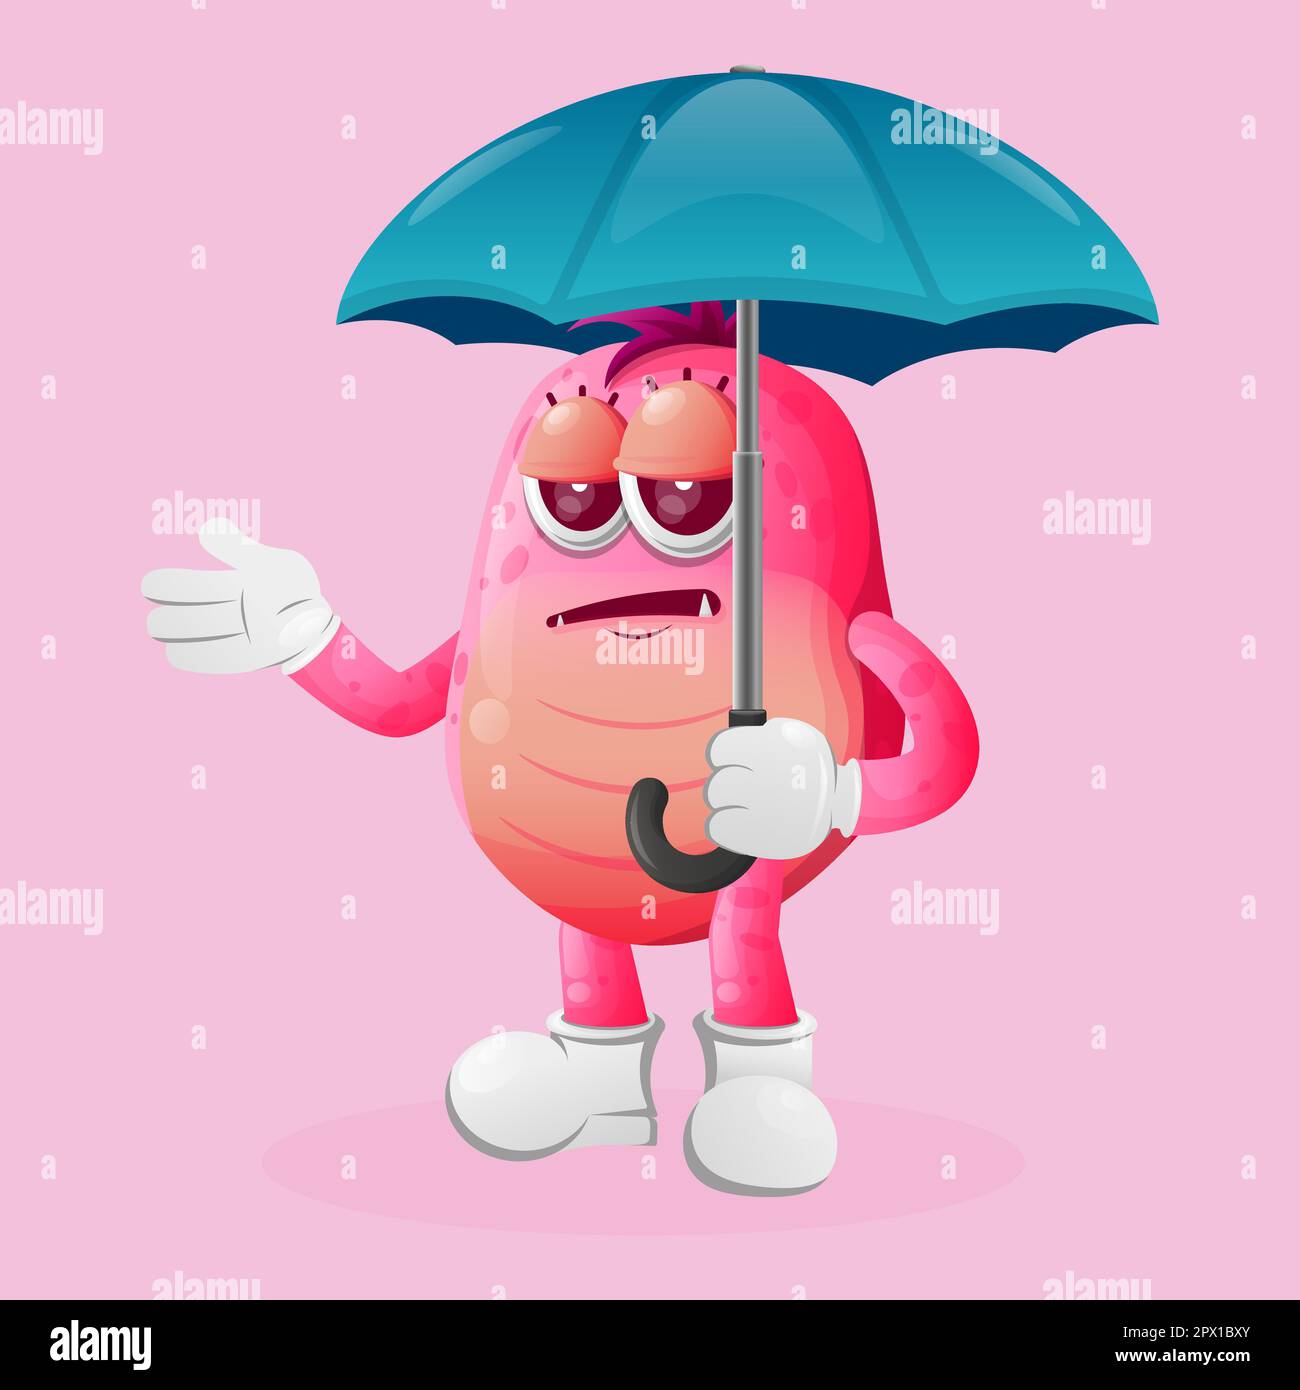 Cute pink monster holding umbrella with boblue expression. Perfect for kids, small business or e-Commerce, merchandise and sticker, banner promotion, Stock Vector